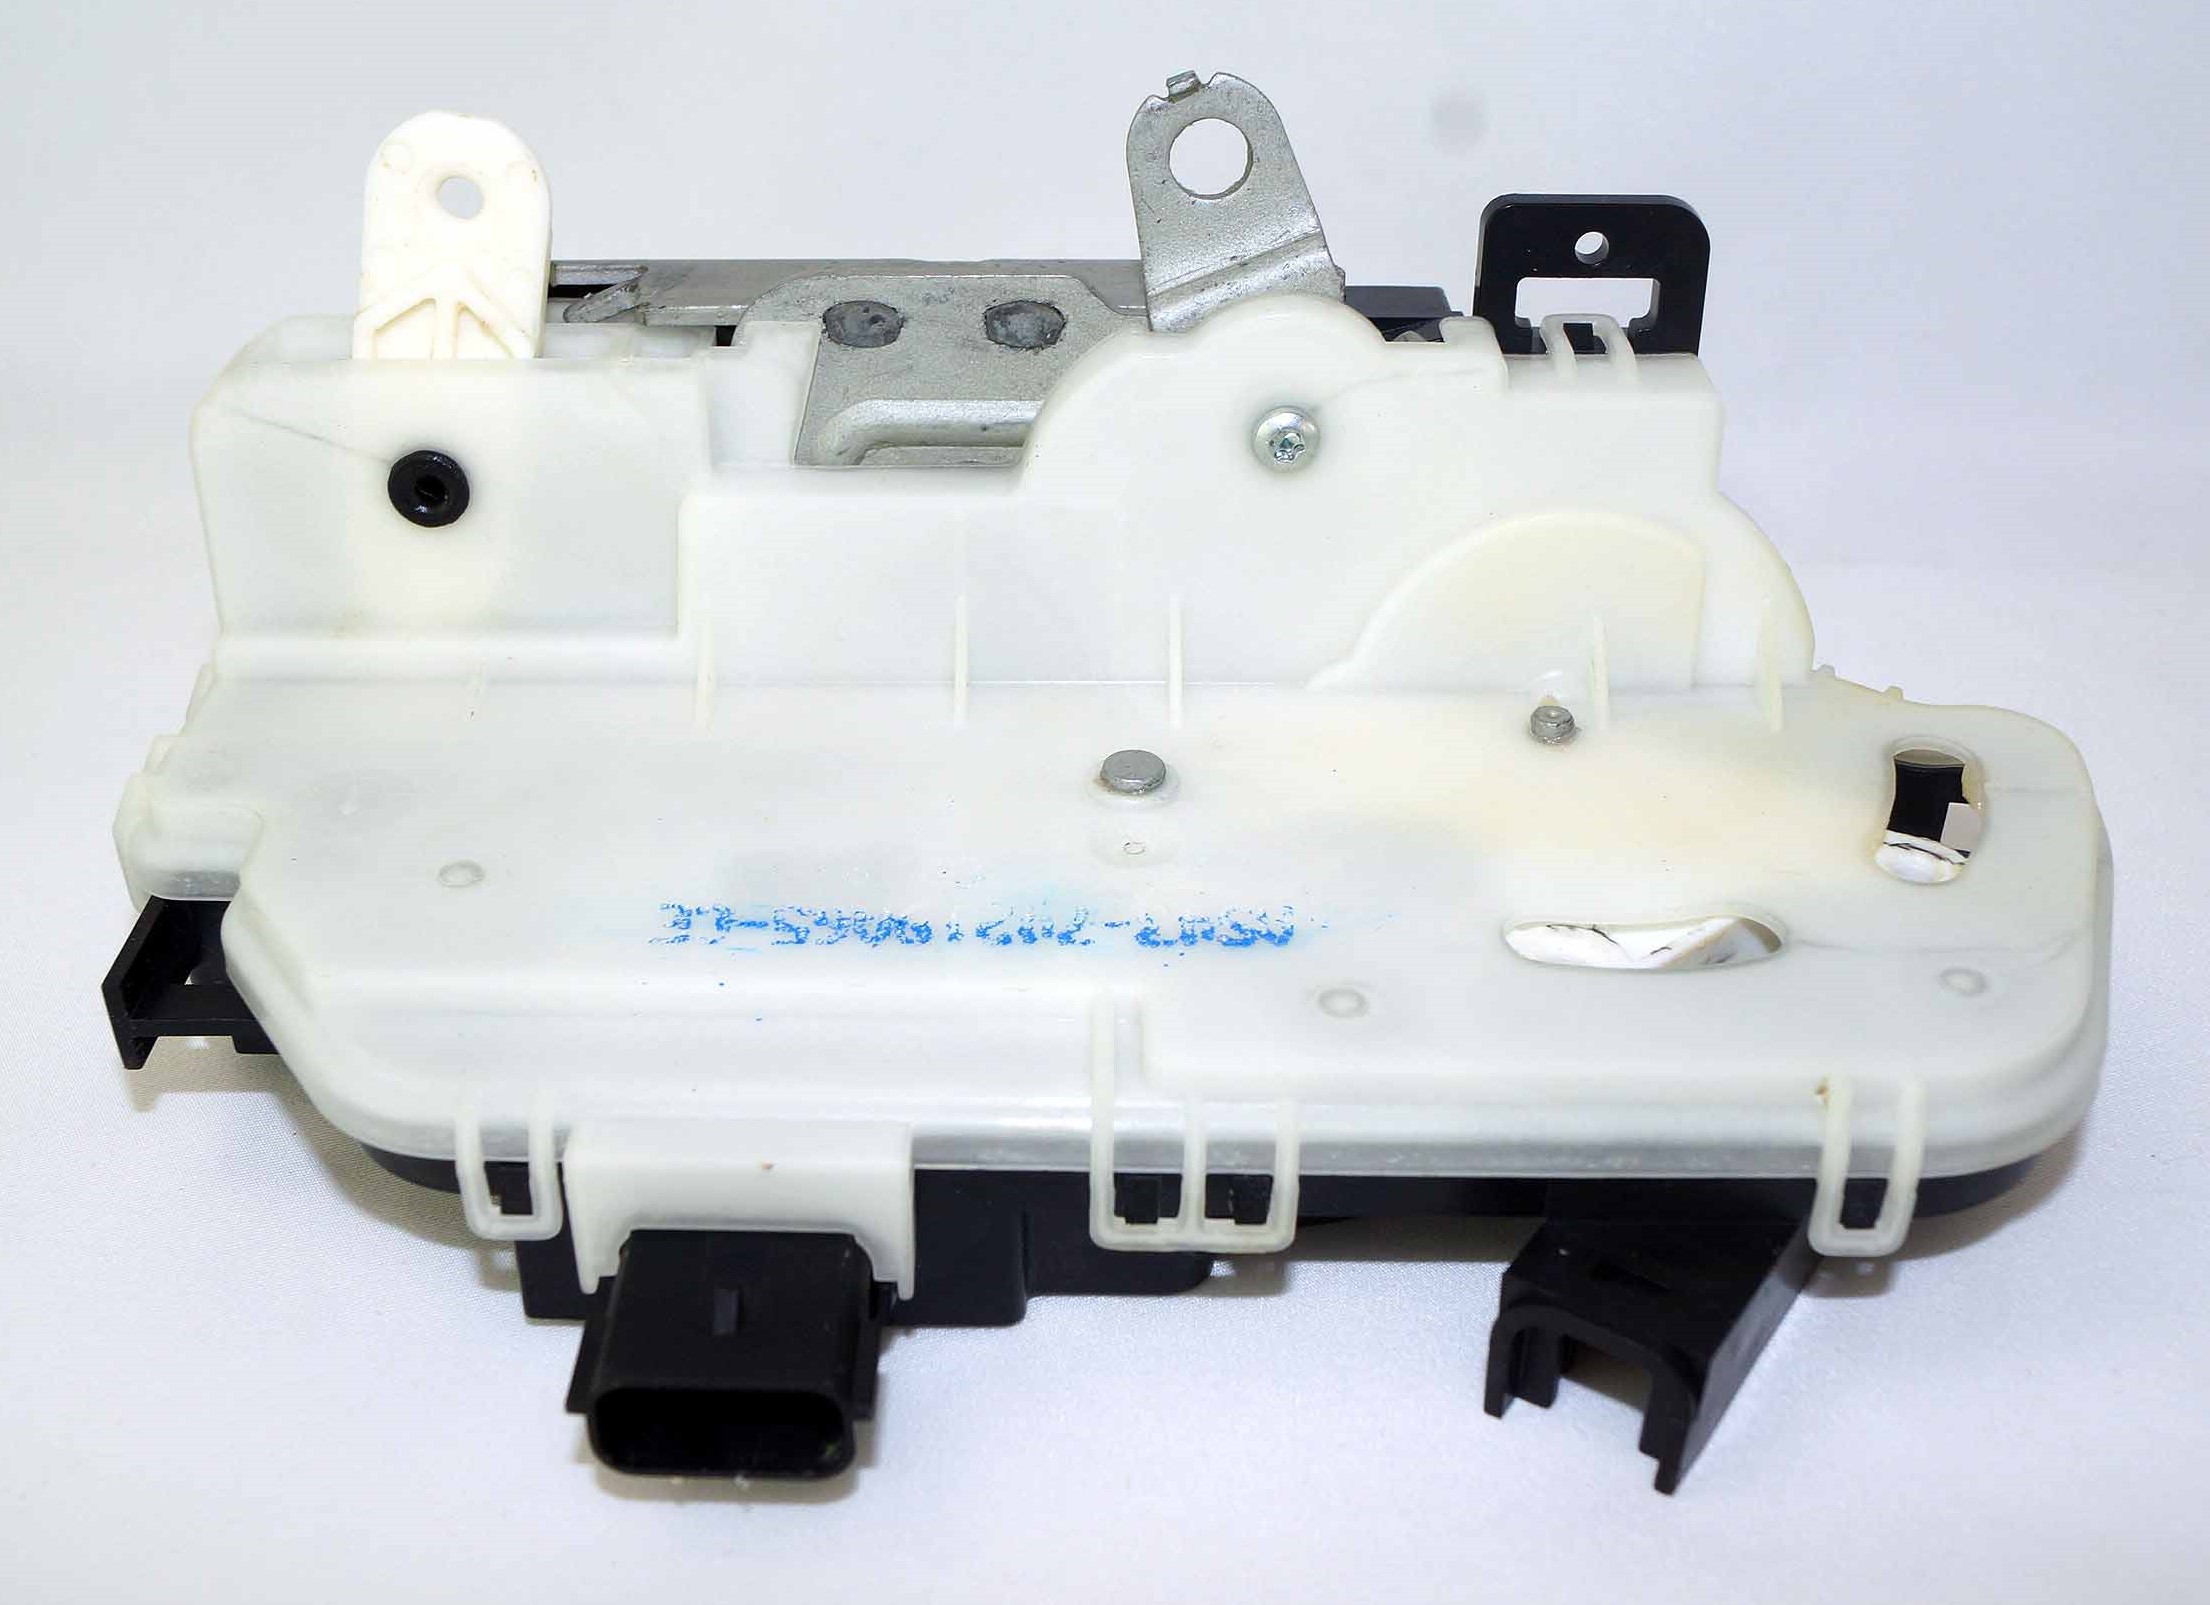 Genuine OEM AS4Z74219A65A Ford Door Lock Actuator Latch Front Left Driver LH - image 2